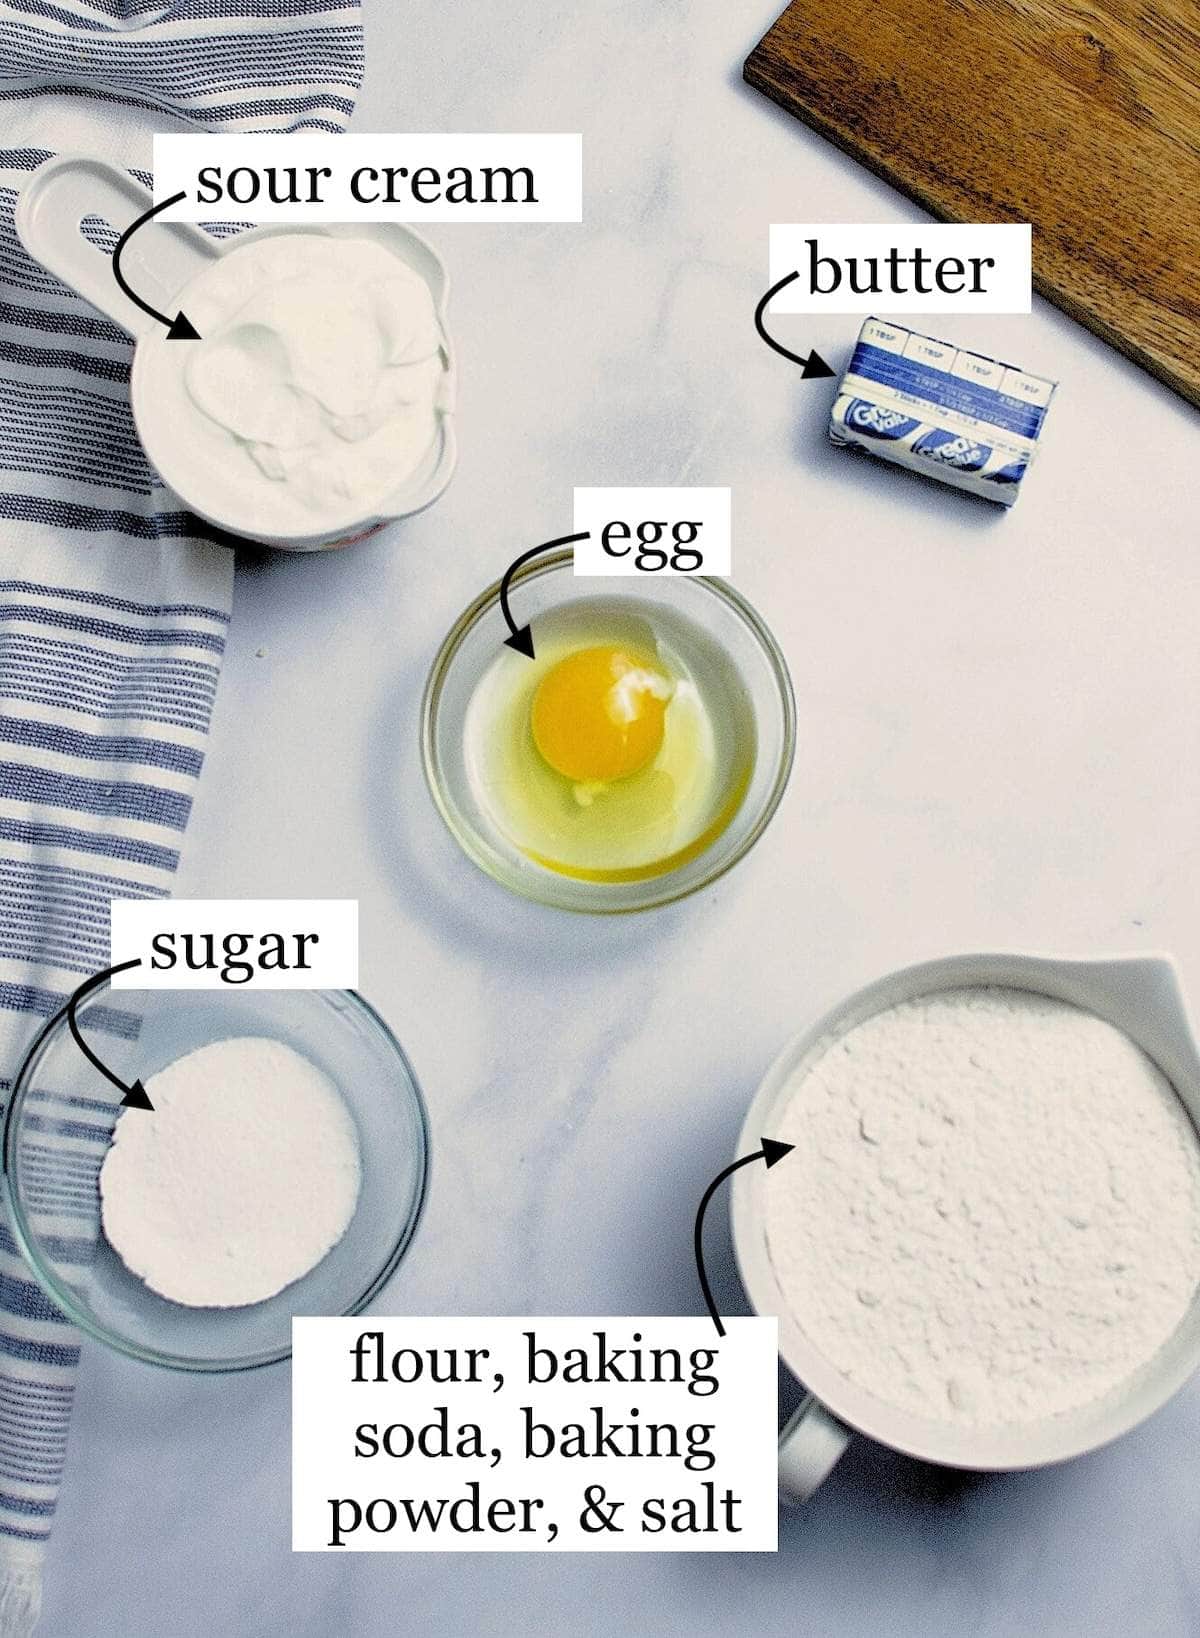 The ingredients in sour cream biscuits, laid out and labled.